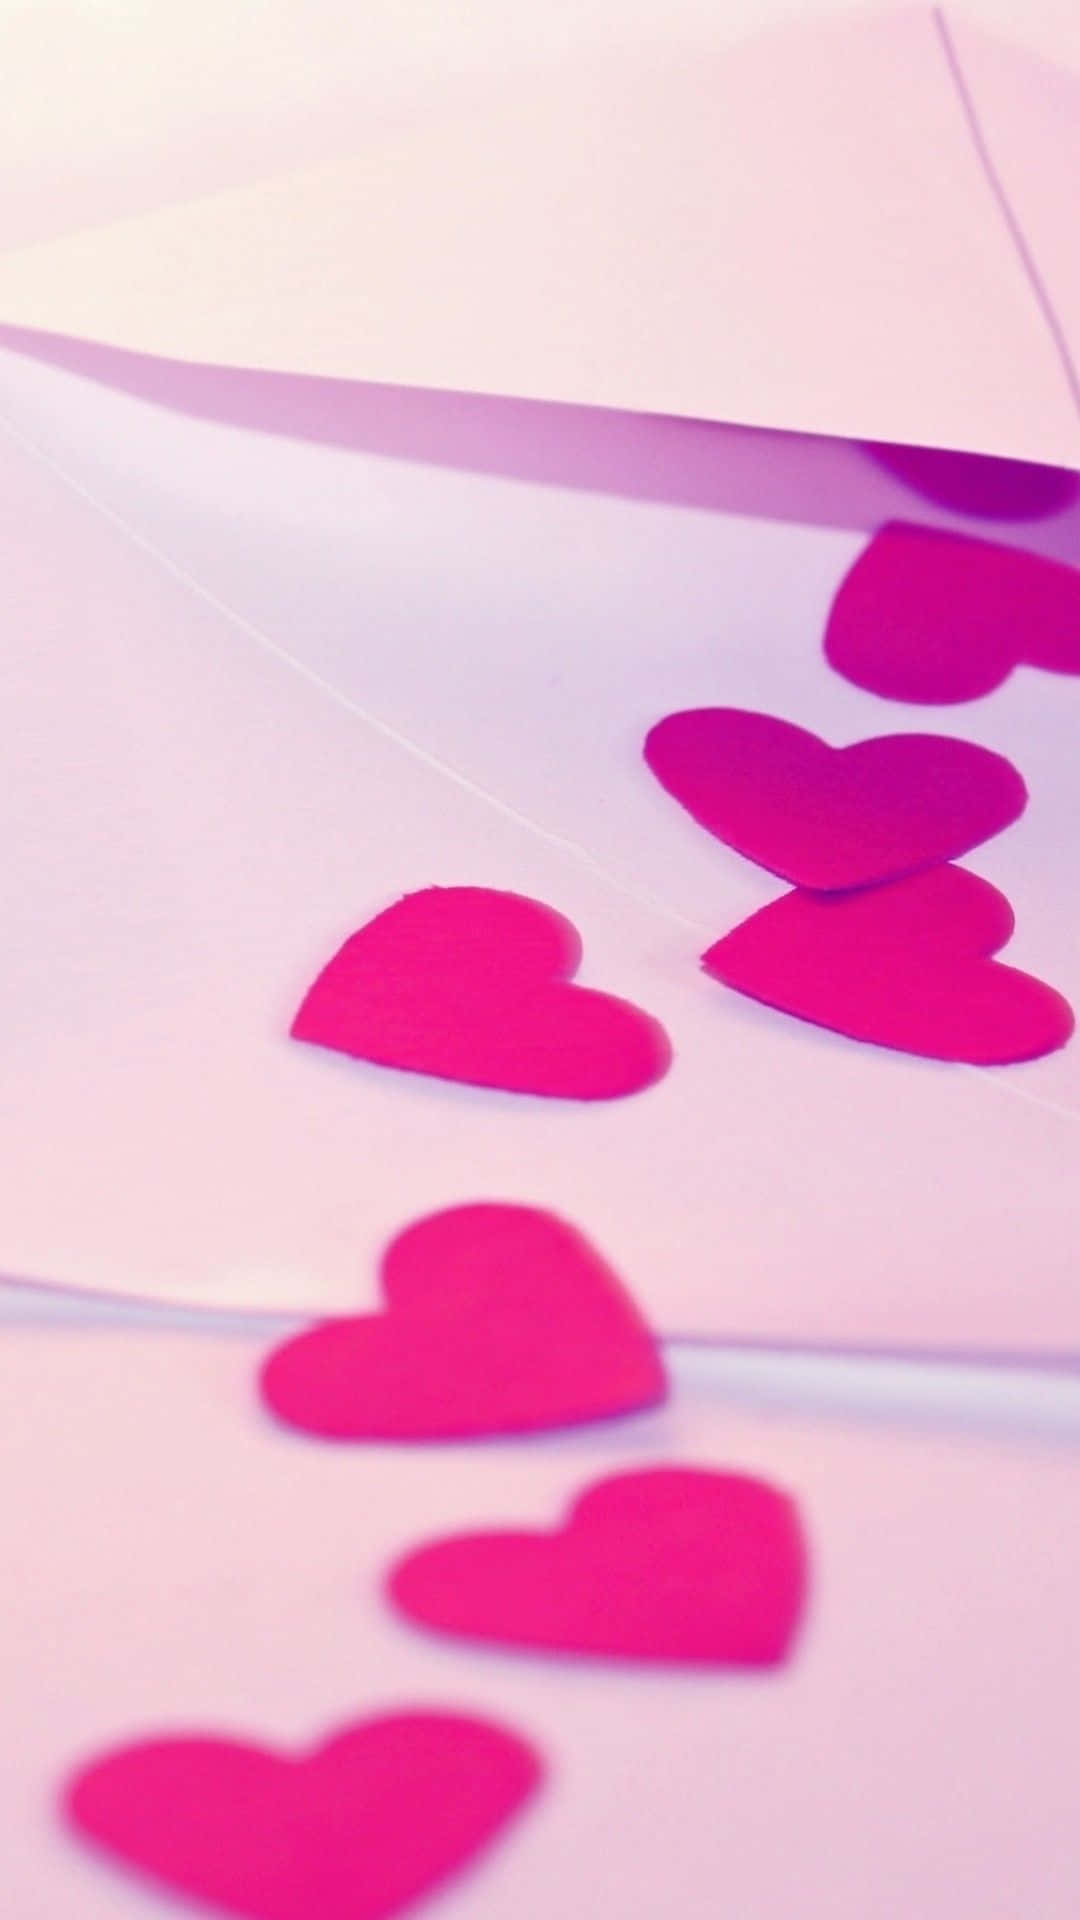 Pink Paper Hearts Girly Tumblr